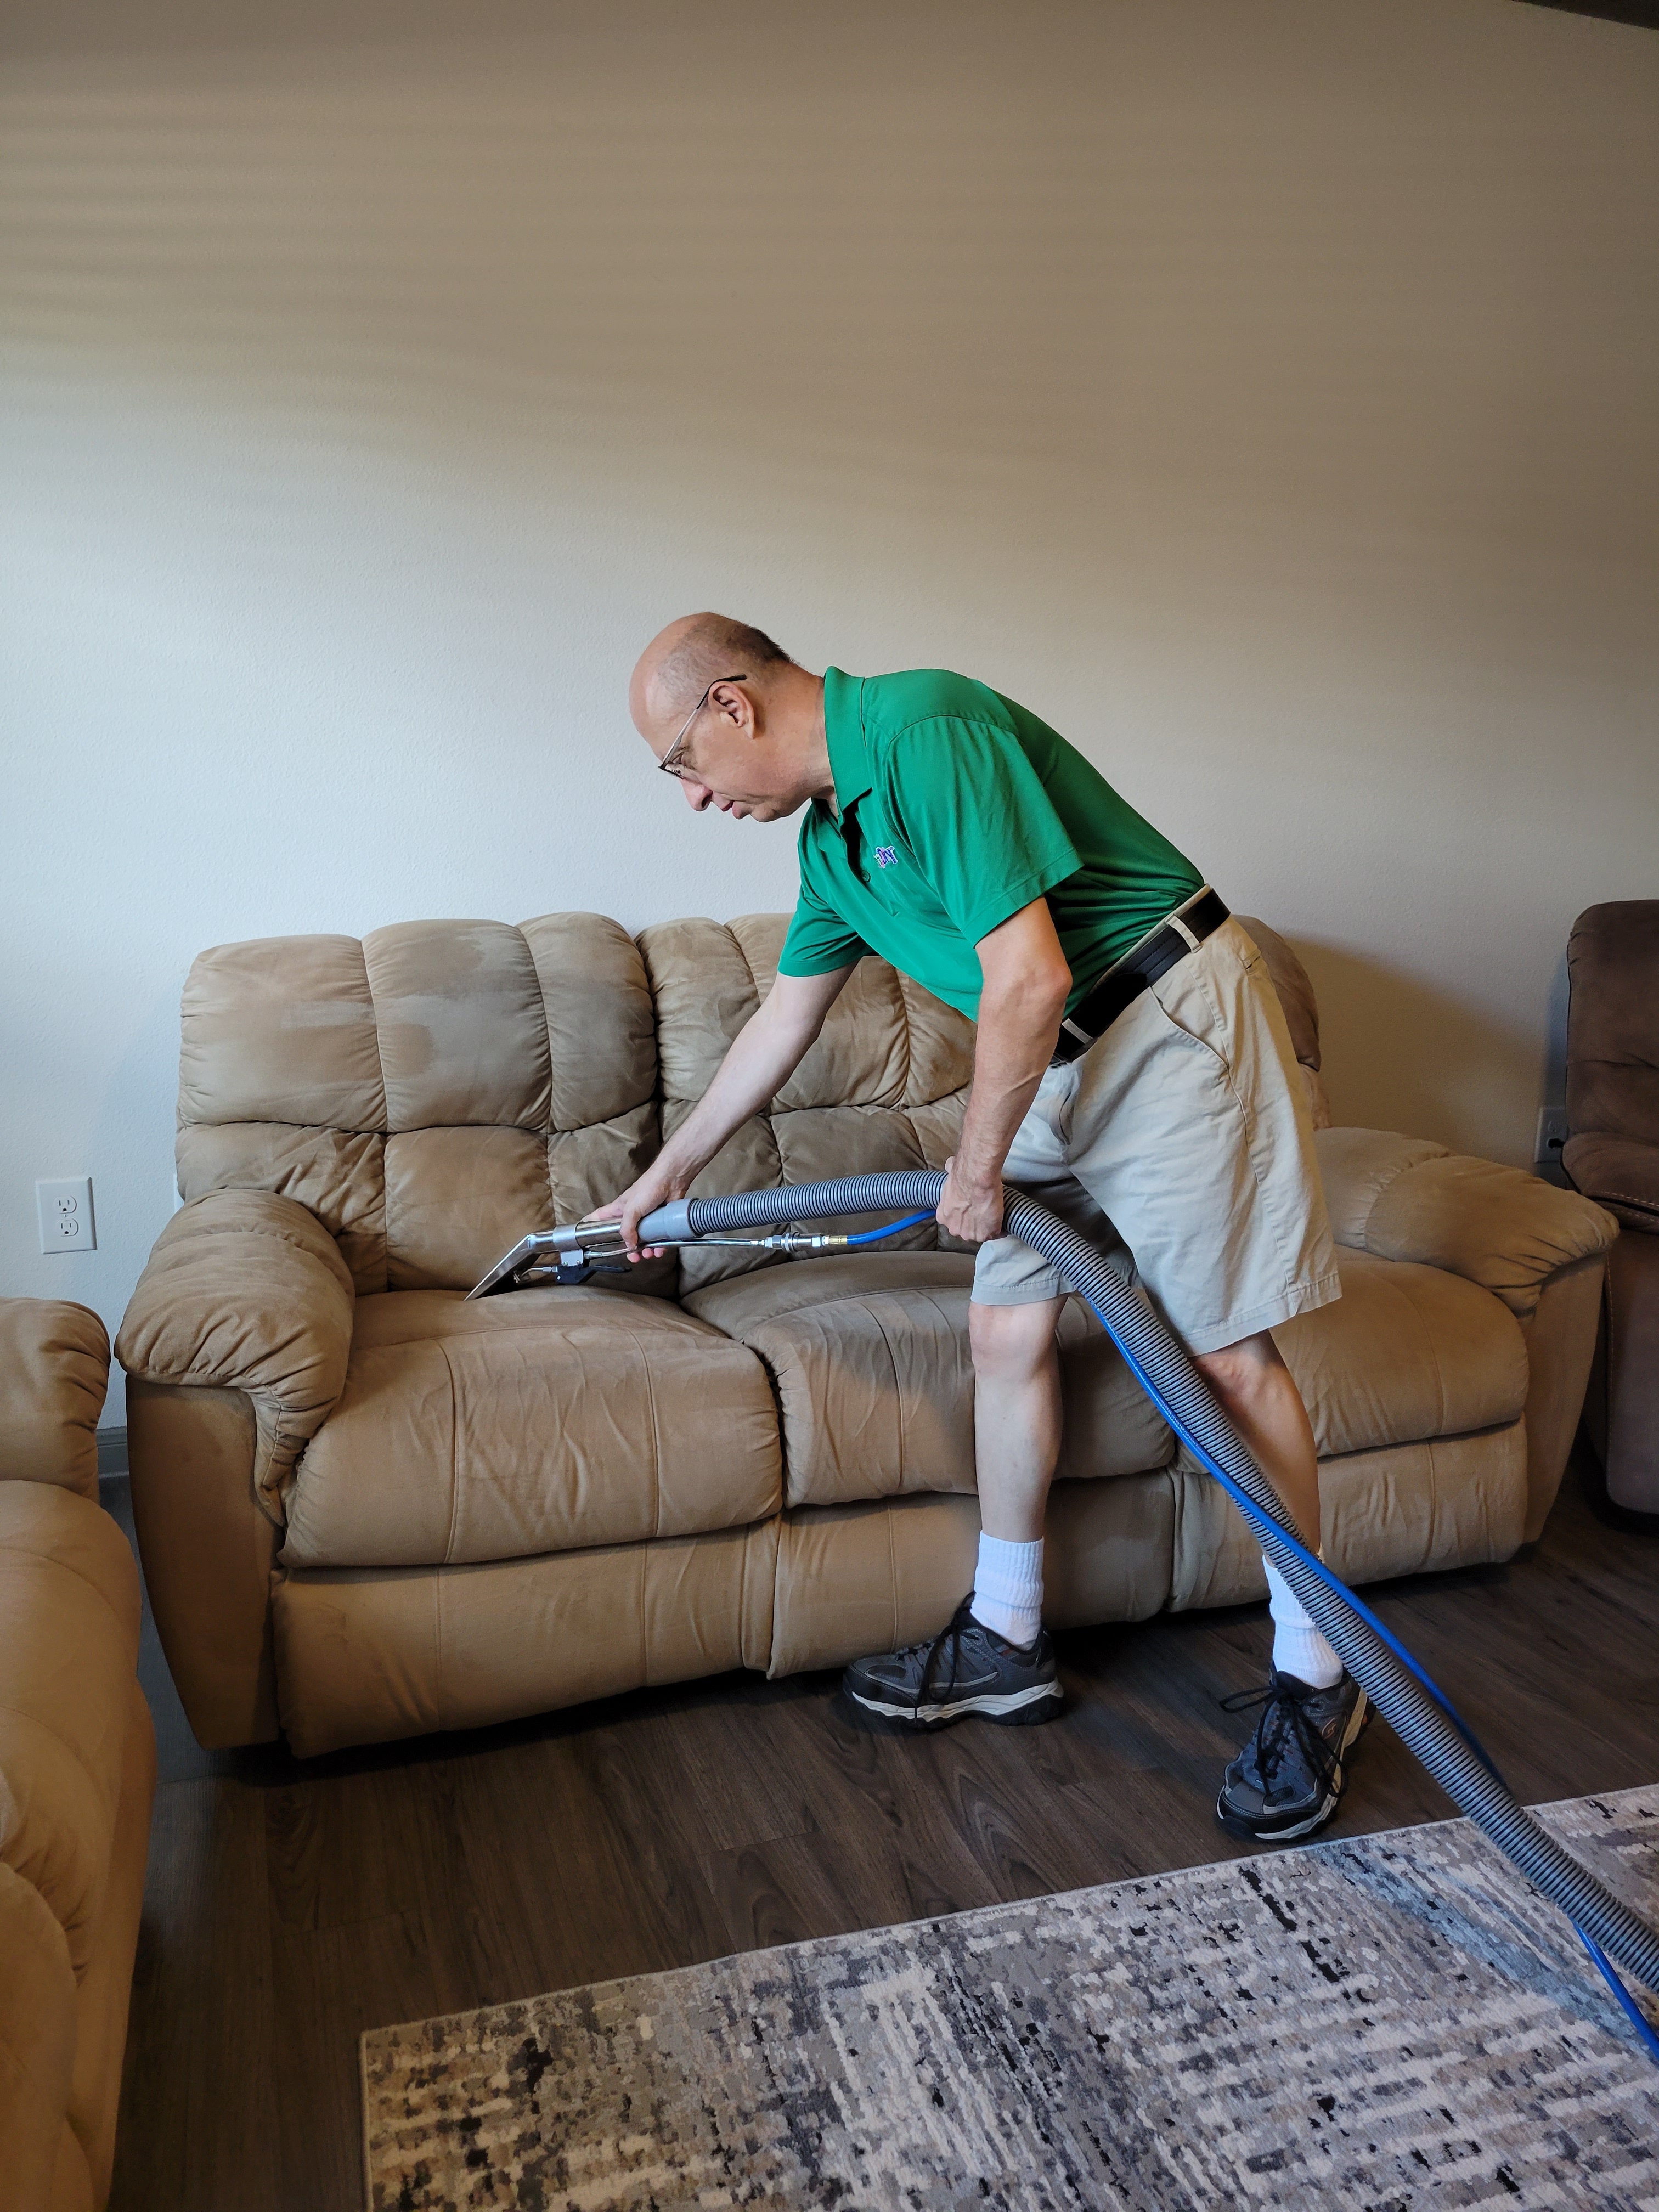 Chem-Dry is your trusted carpet and upholstery cleaning service provider